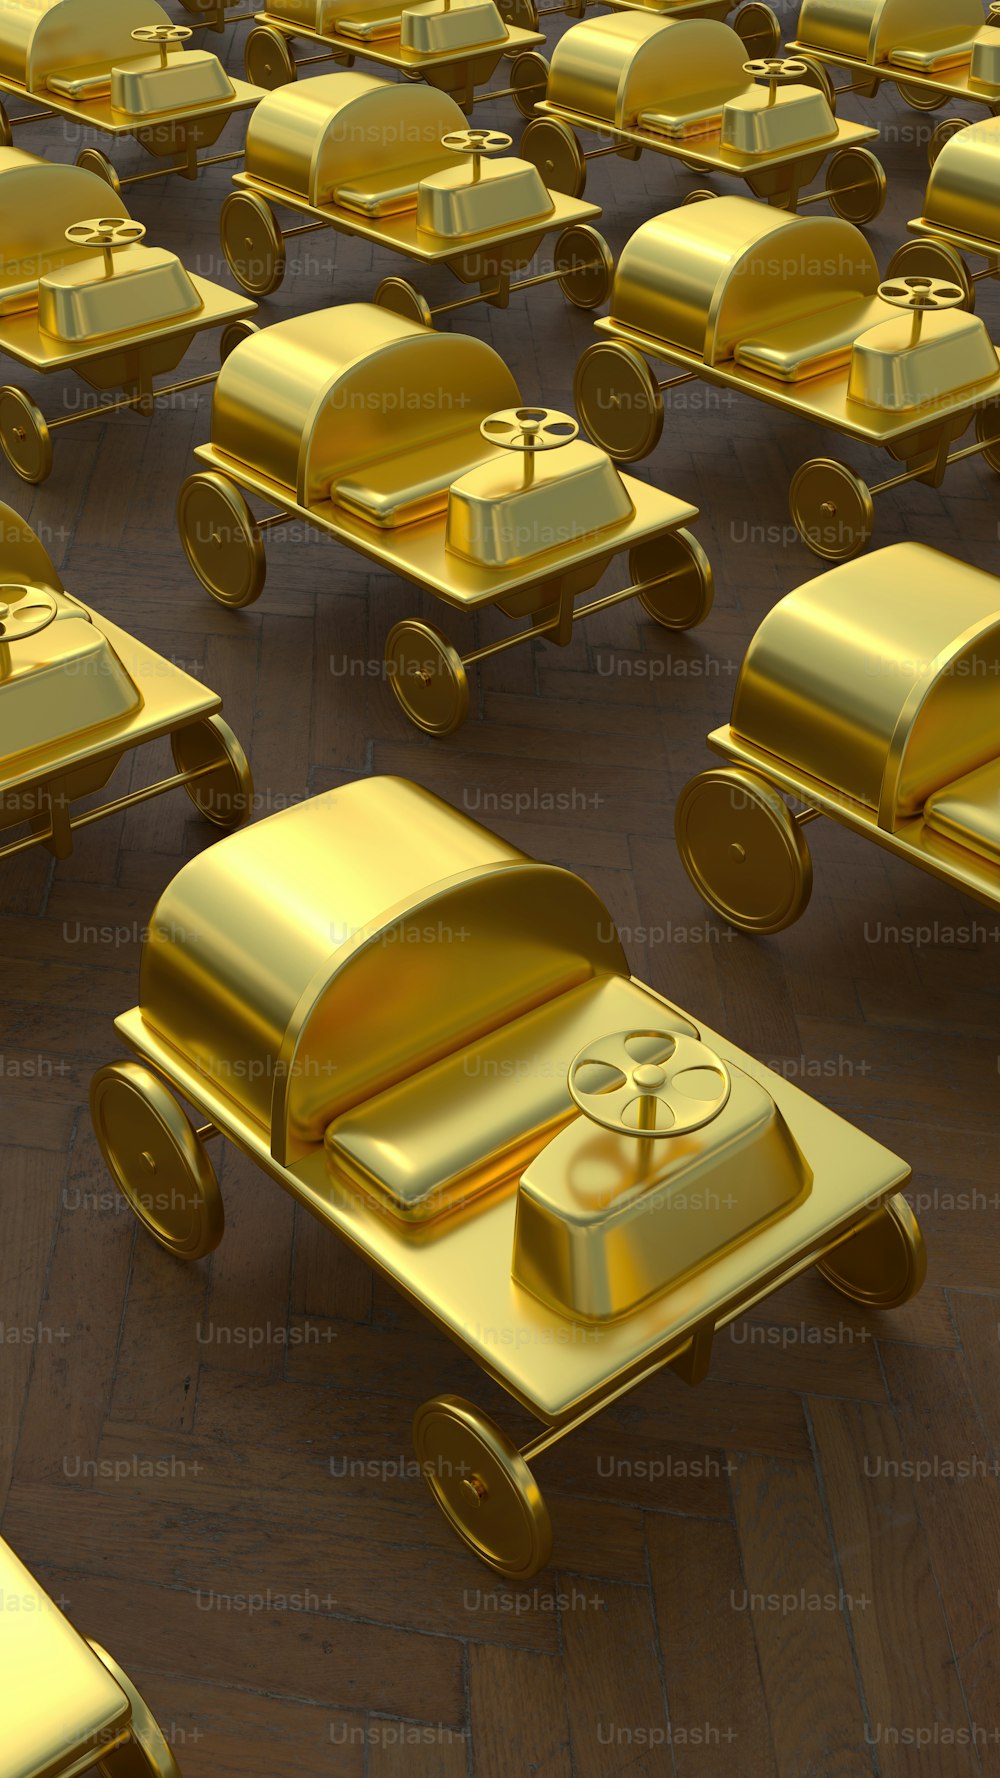 a large group of gold toy cars sitting on top of a wooden floor